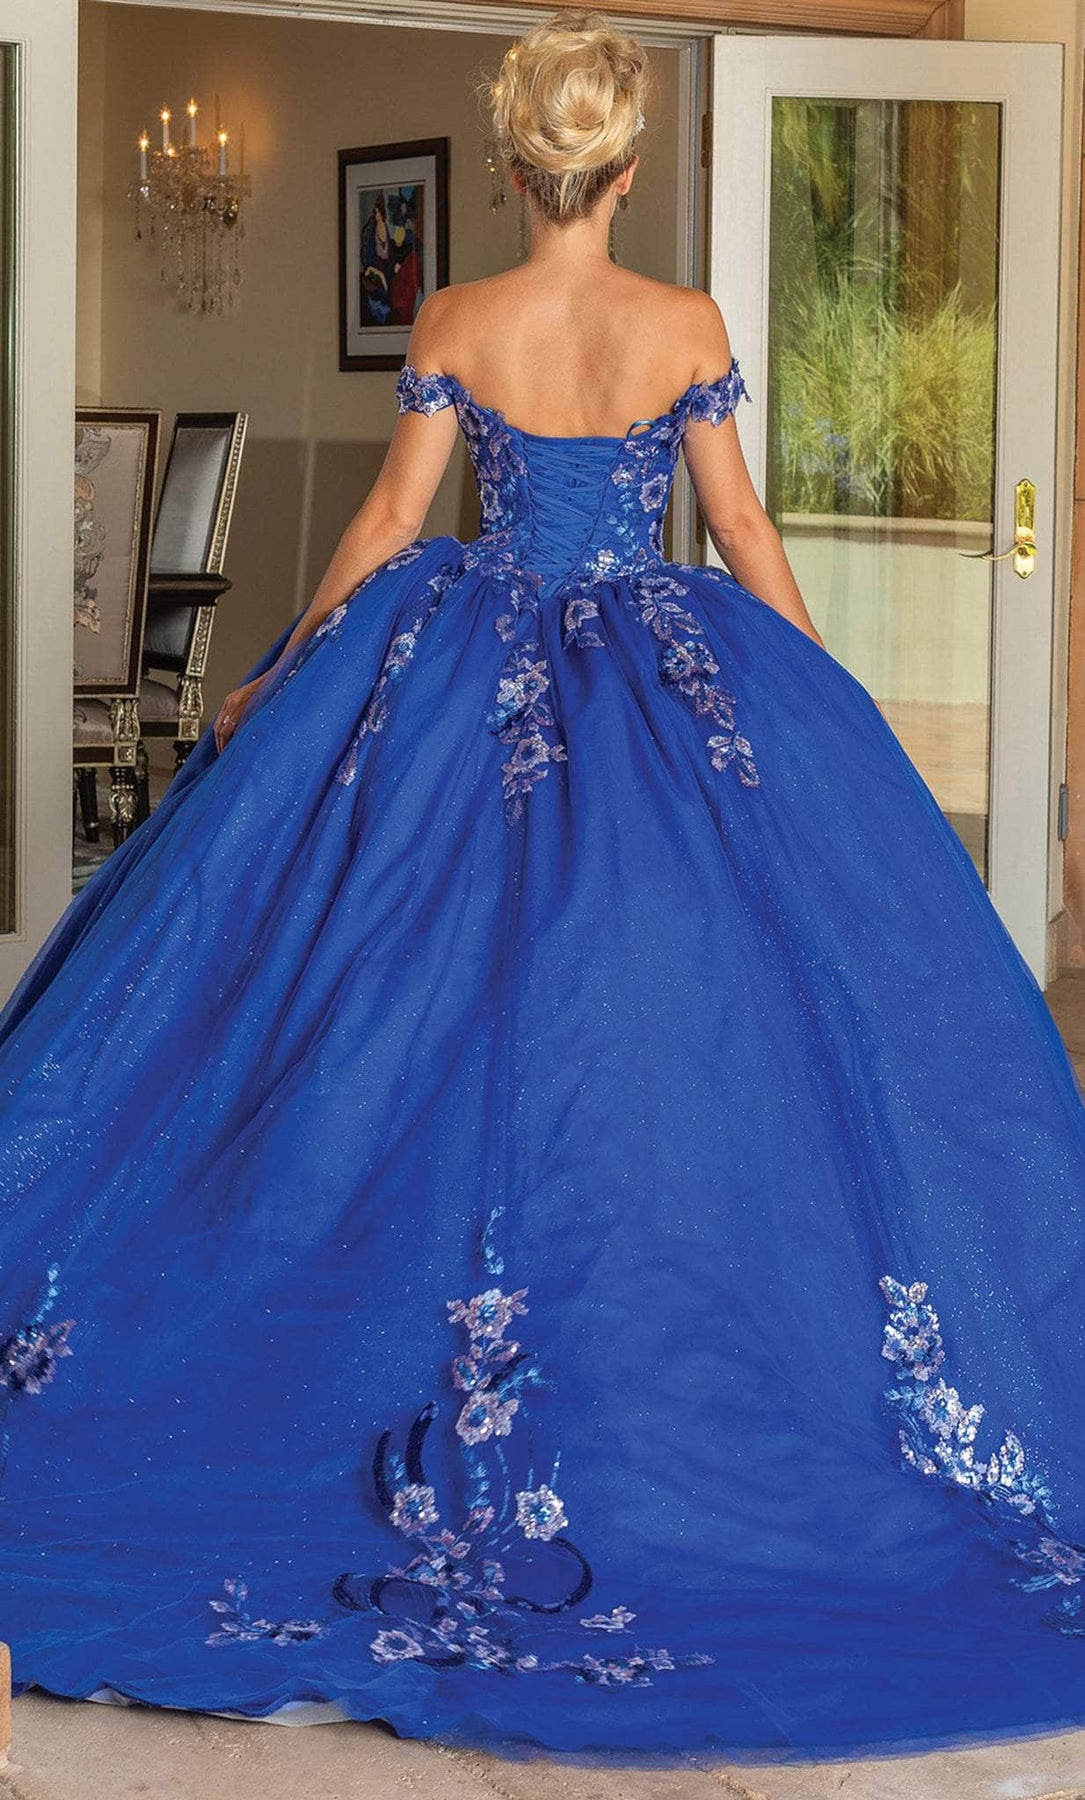 Dancing Queen 1737 - Off-Shoulder Floral Embellished Ballgown Ball Gowns